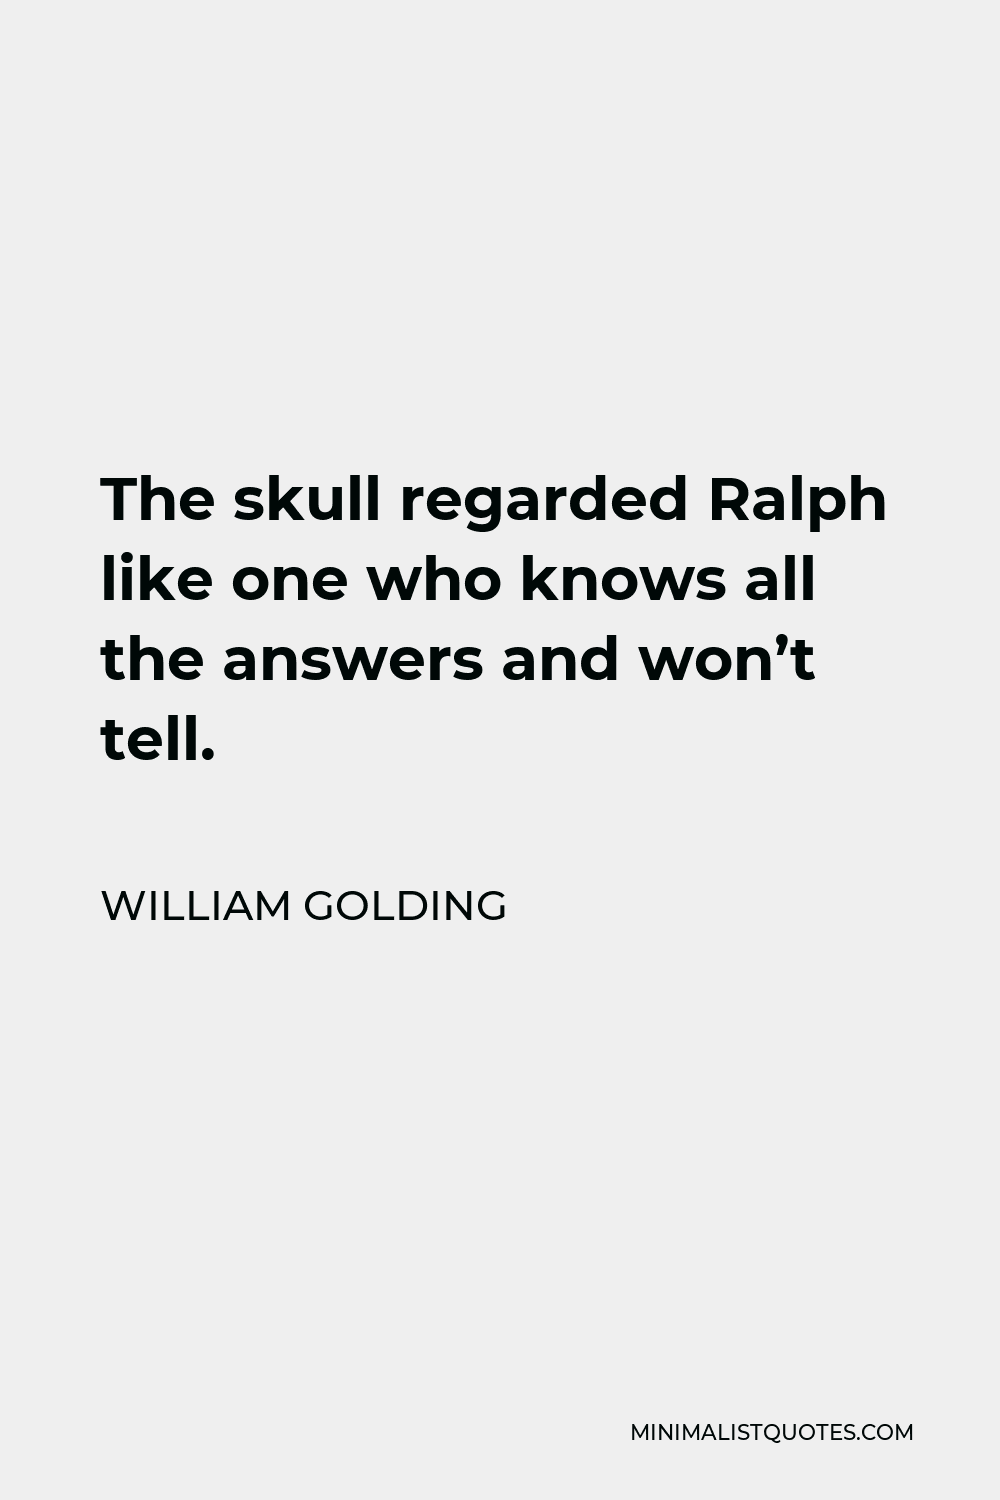 William Golding Quote - The skull regarded Ralph like one who knows all the answers and won’t tell.